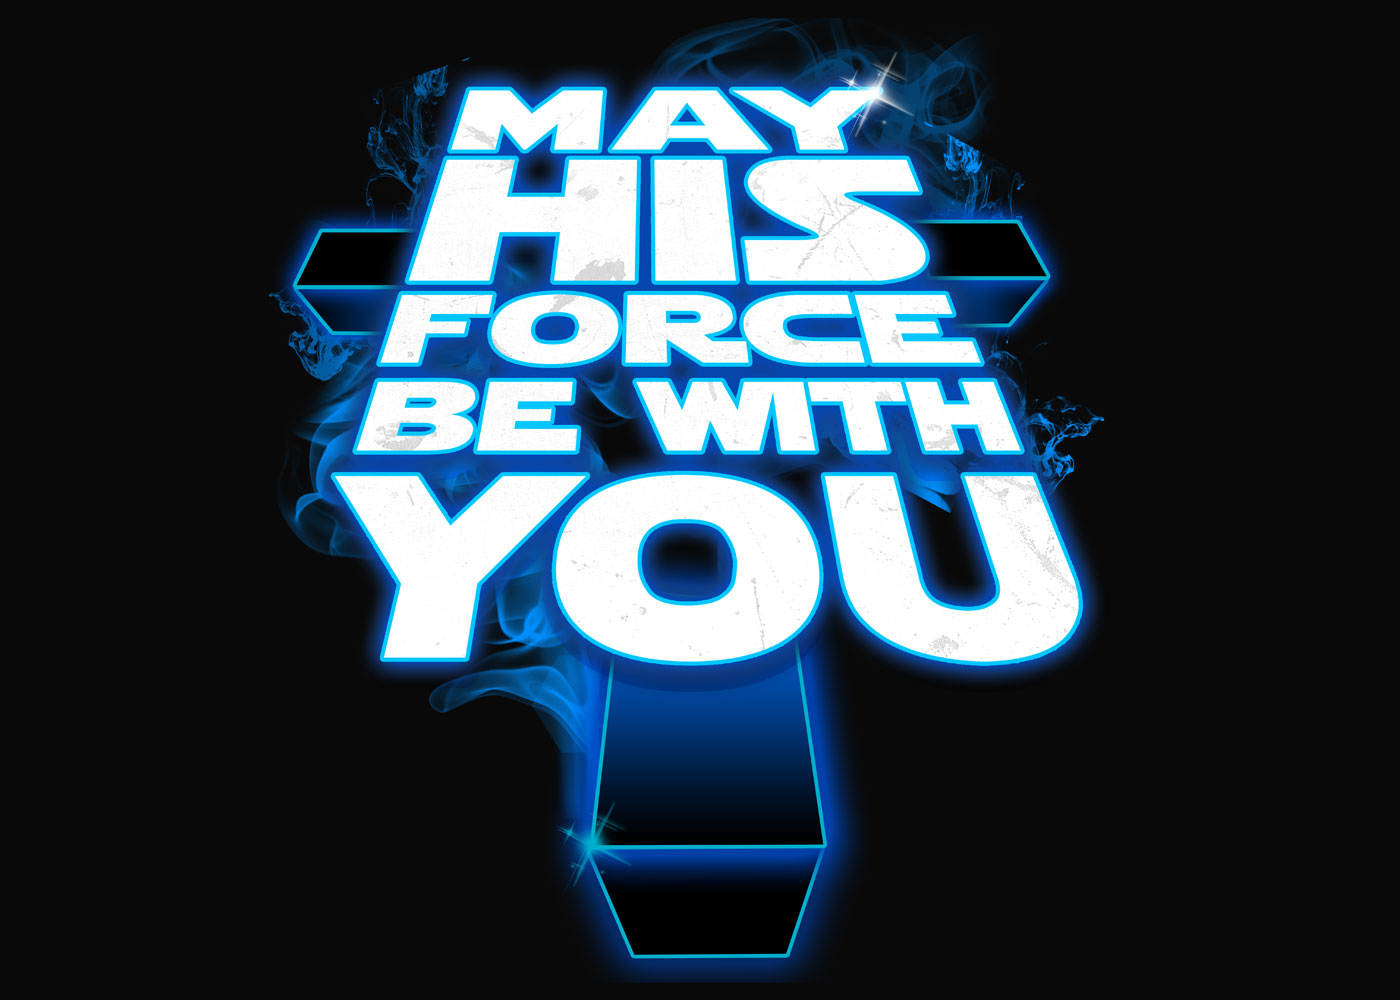 may the force be with you wallpaper,text,font,electric blue,logo,graphic design